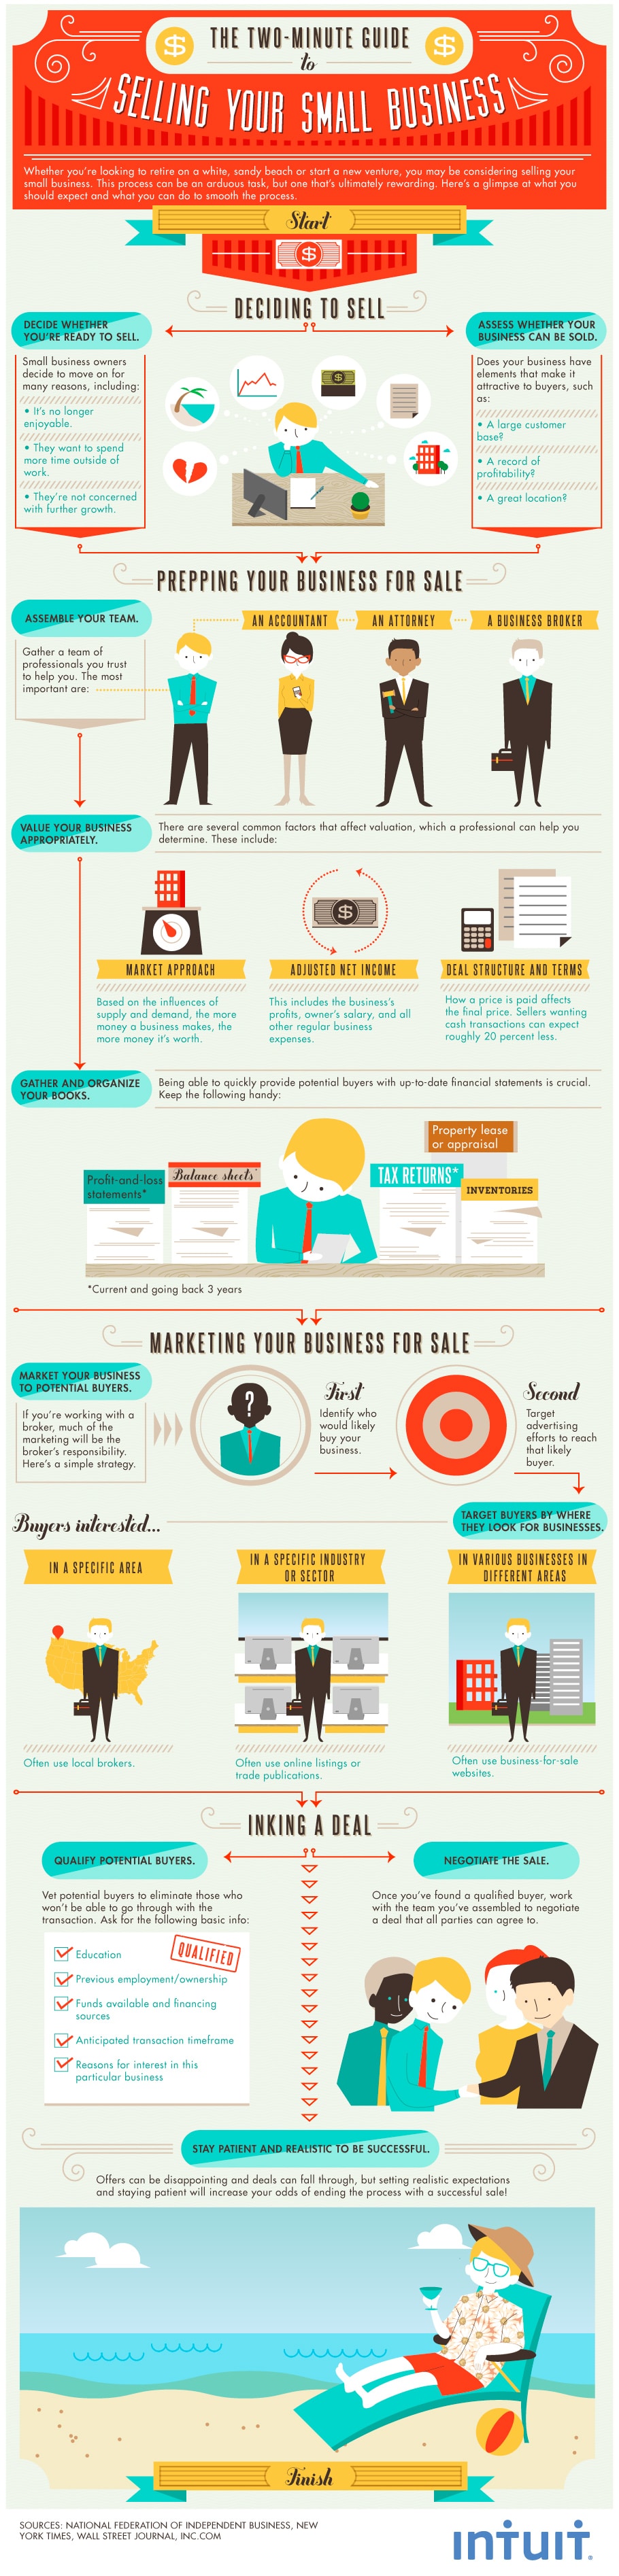 selling-your-small-business-infographic